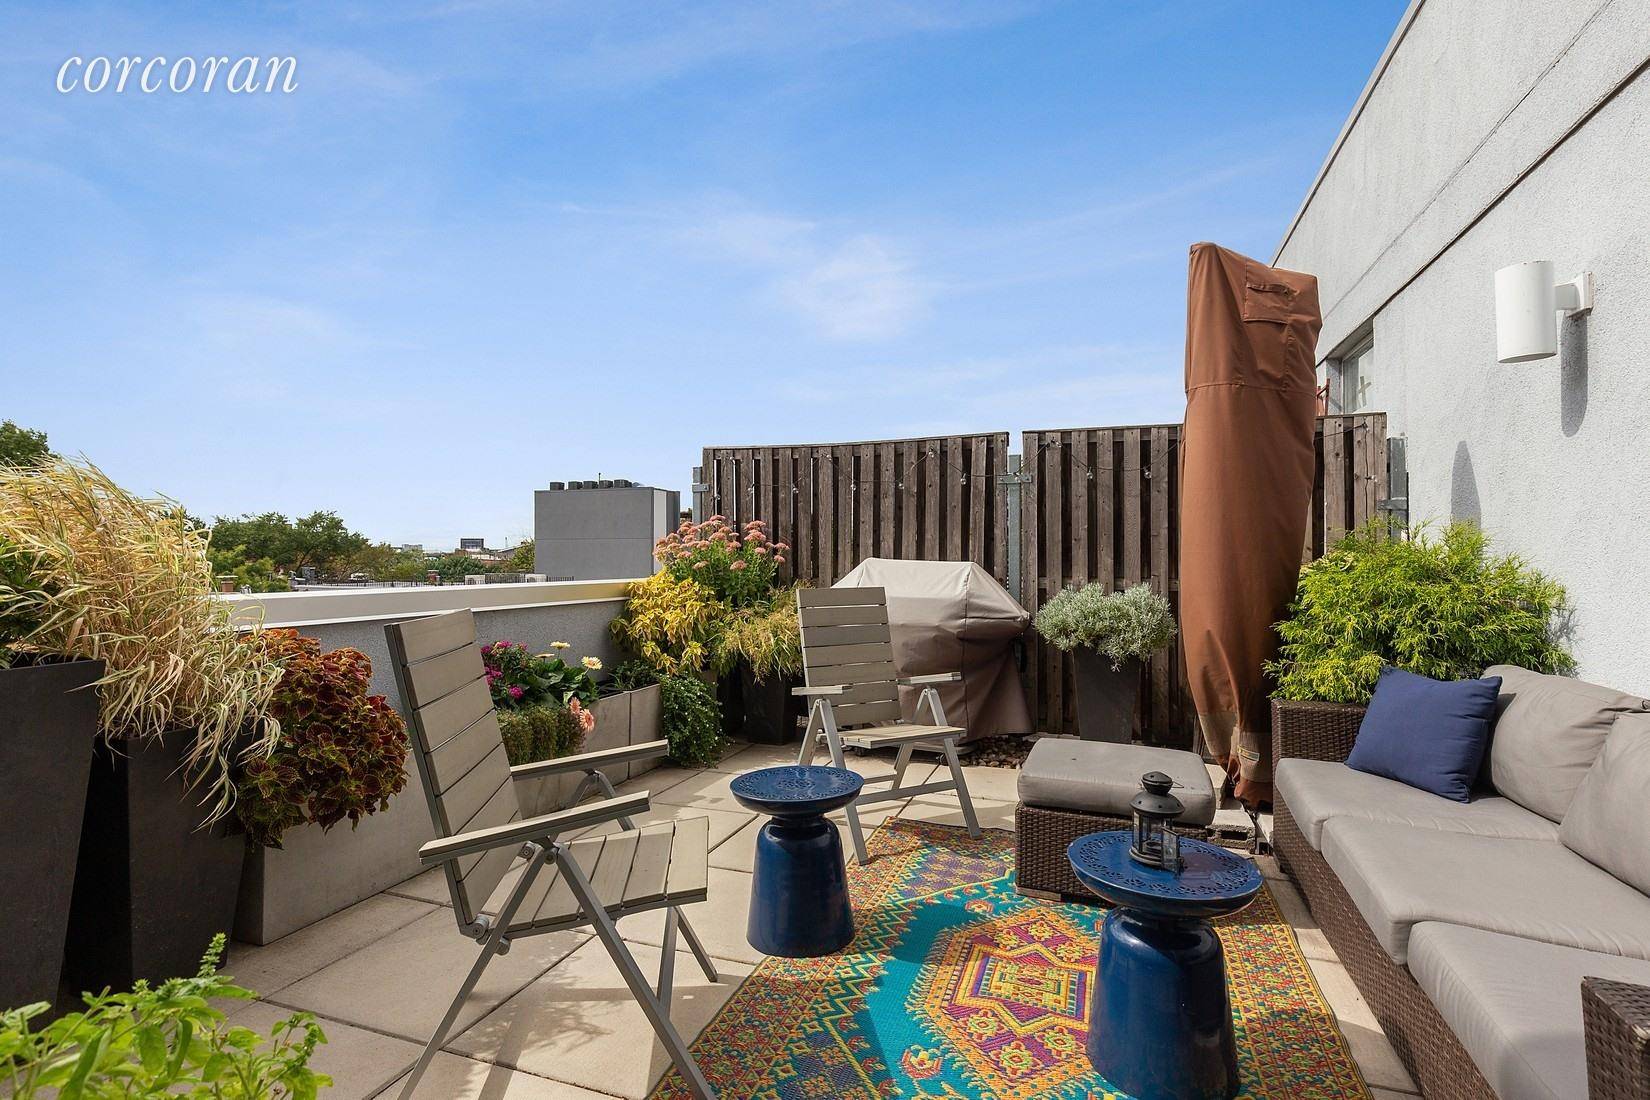 This large, two bedroom, two bath condo offers a wonderful, split bedroom layout, a 250 square foot PRIVATE ROOF TERRACE, separate basement storage, PLUS a HEATED INDOOR PARKING SPOT no ...